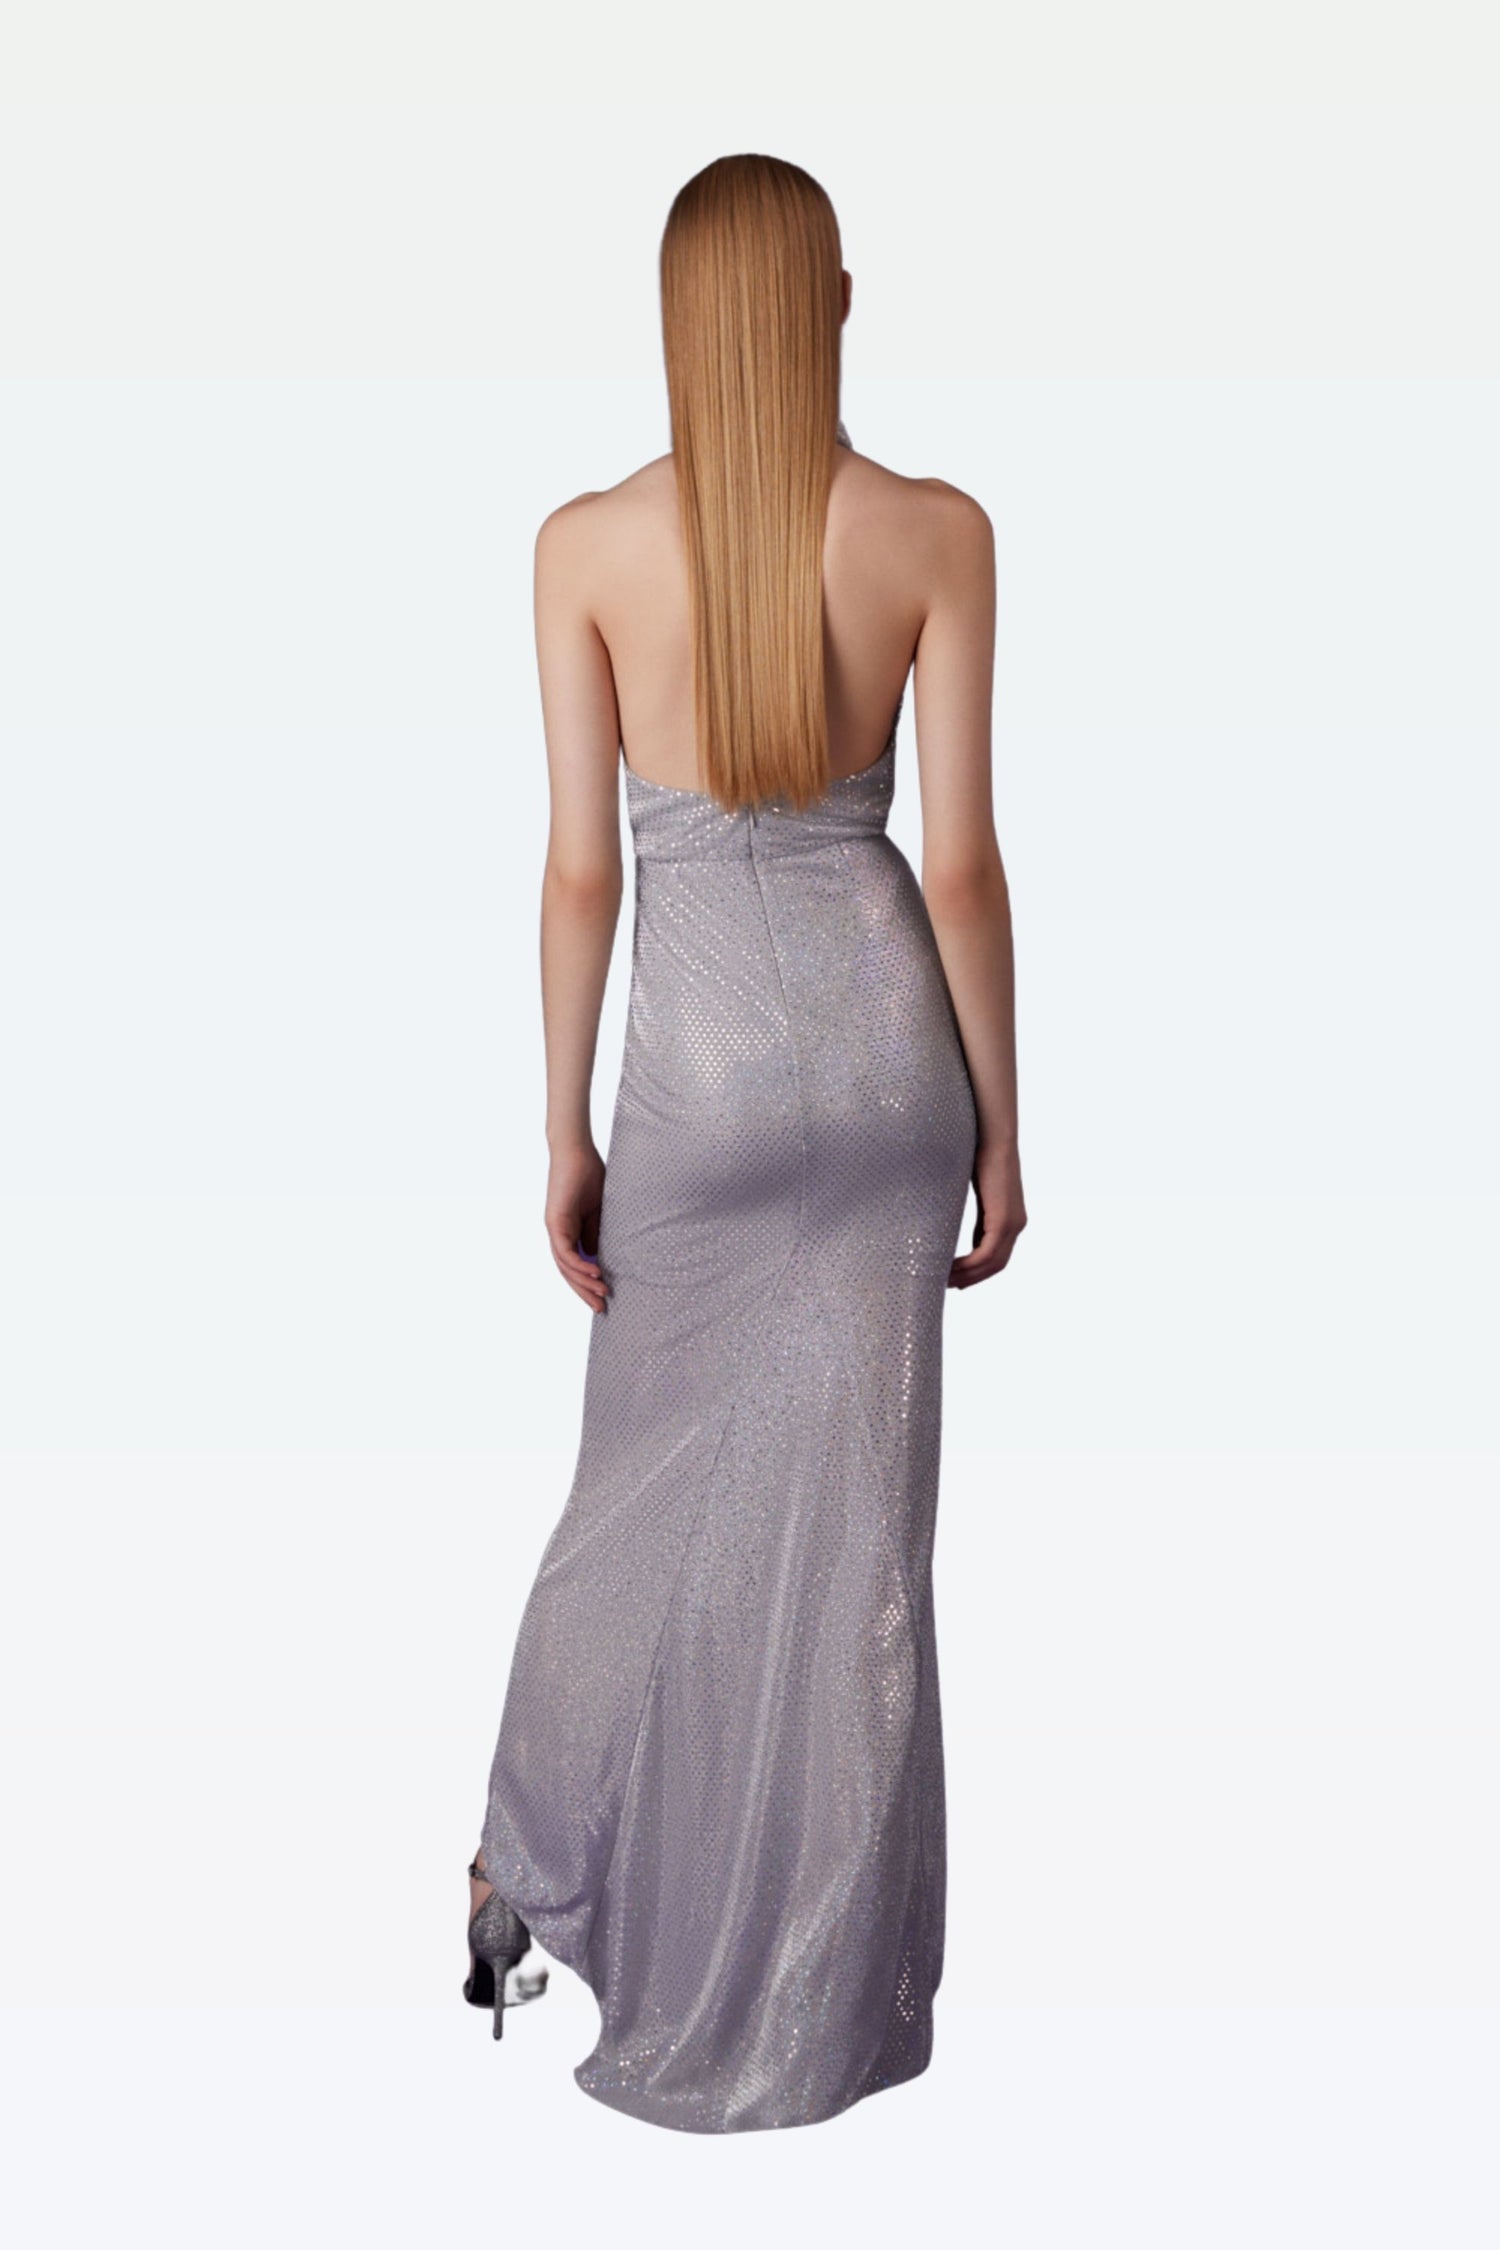 Tailed Evening Dress